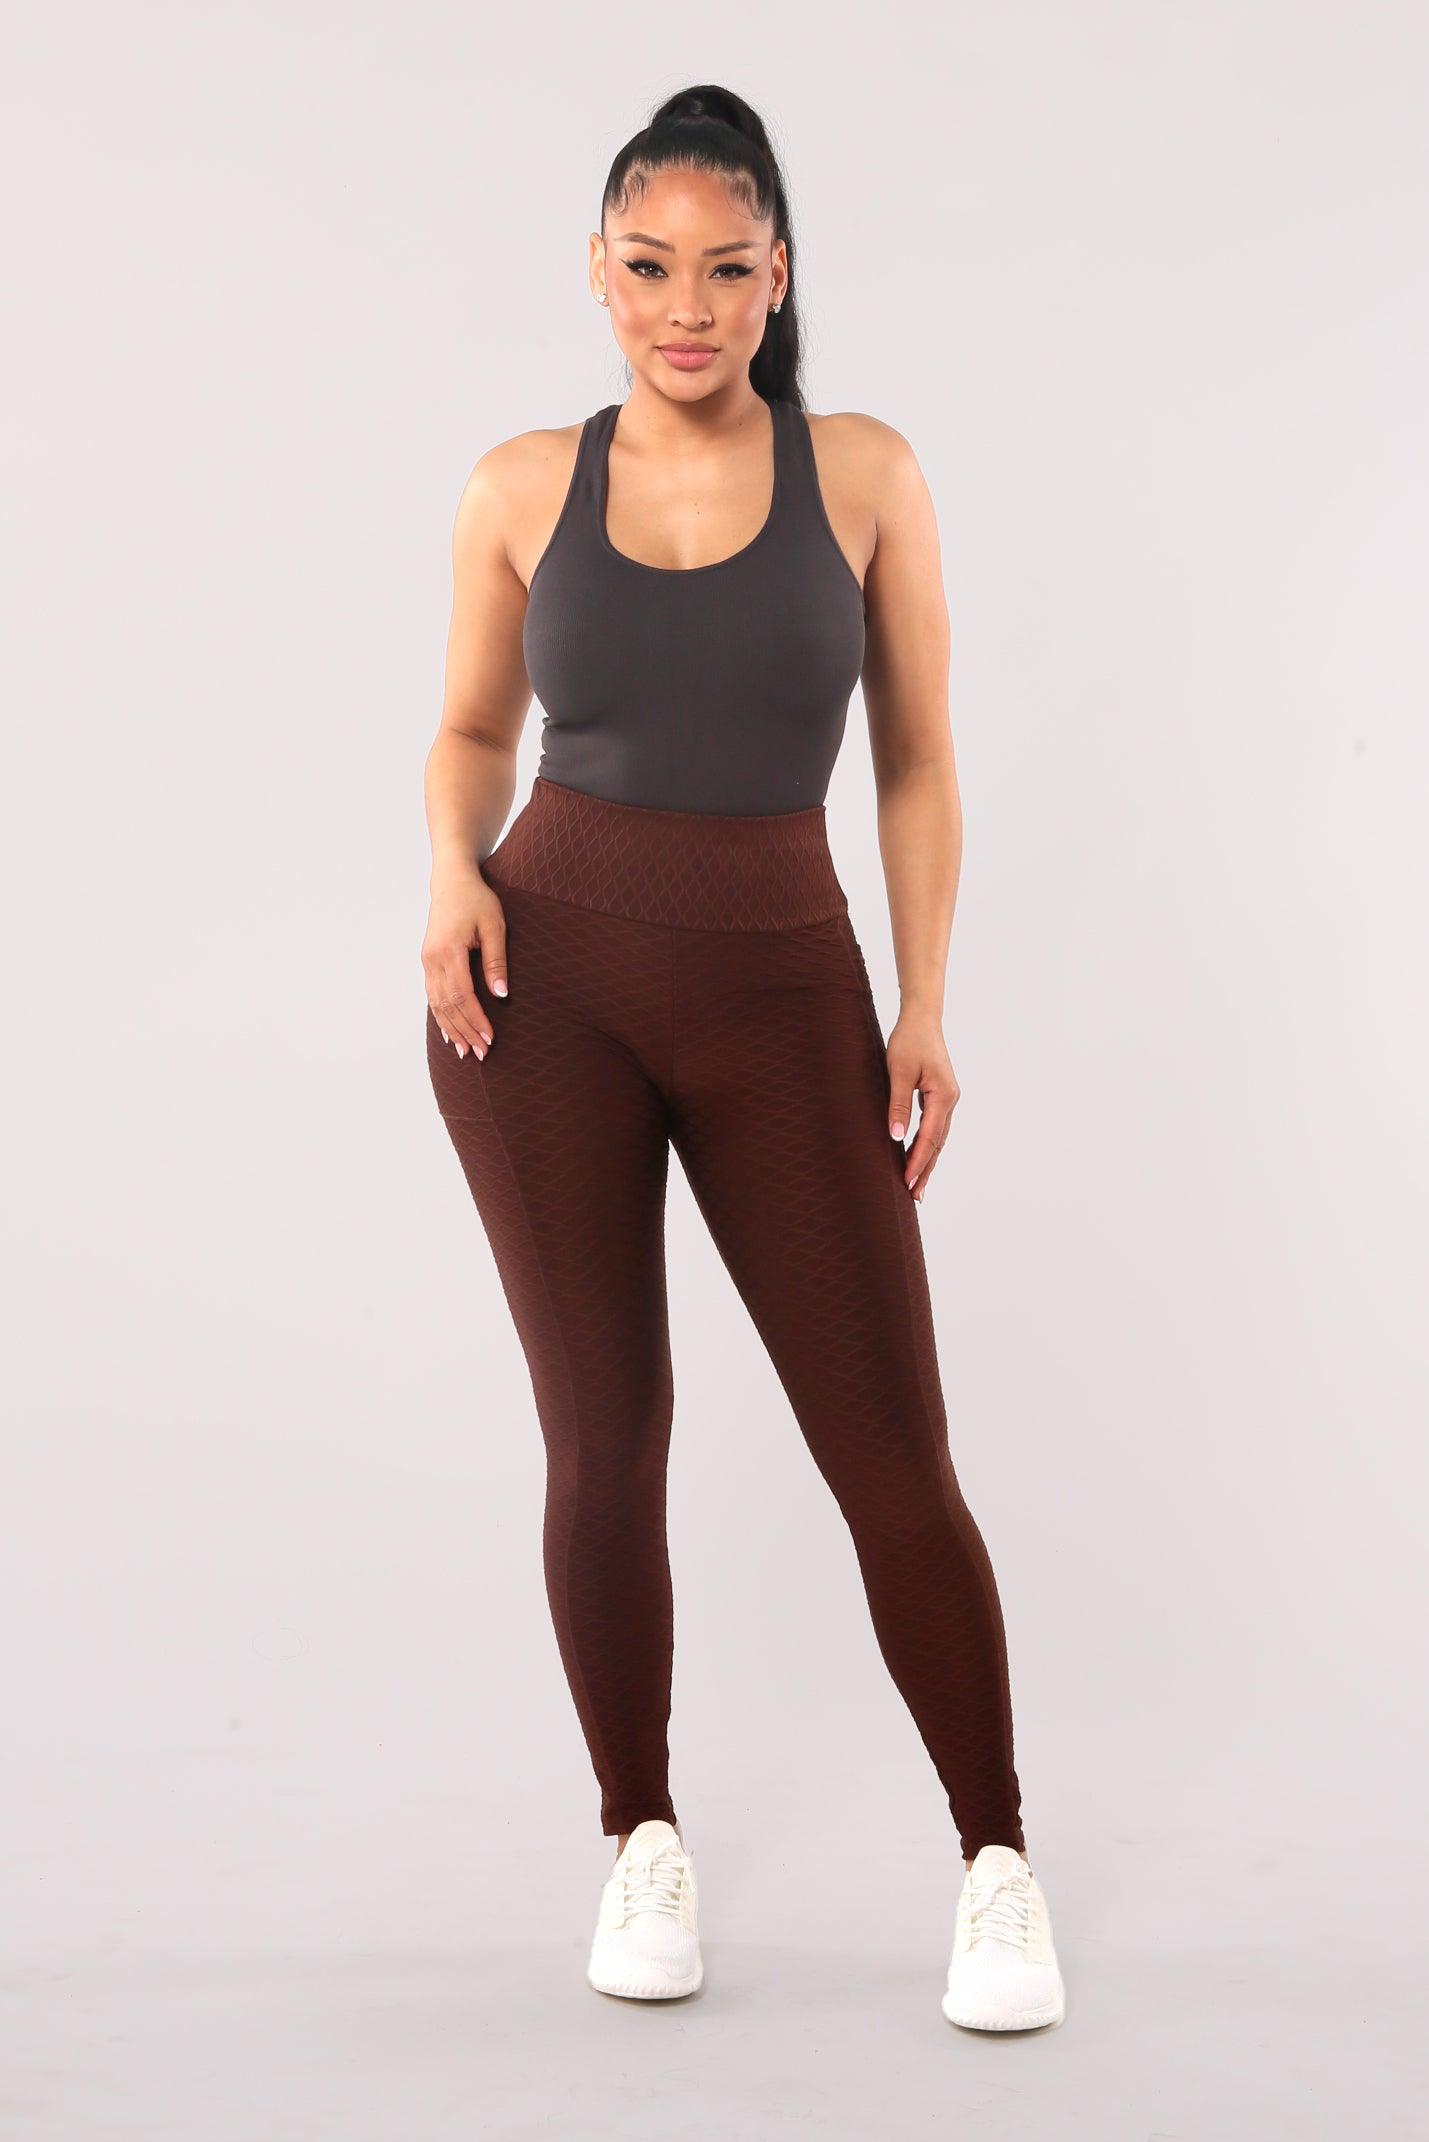 ShoSho Womens Two Piece Outfit Yoga Set Athletic Leggings and Matching  Sports Bra Top 2-Piece Sets,  Croptank+meshleggingw/Pockets:solid:darkheathergrey, Small : :  Clothing, Shoes & Accessories